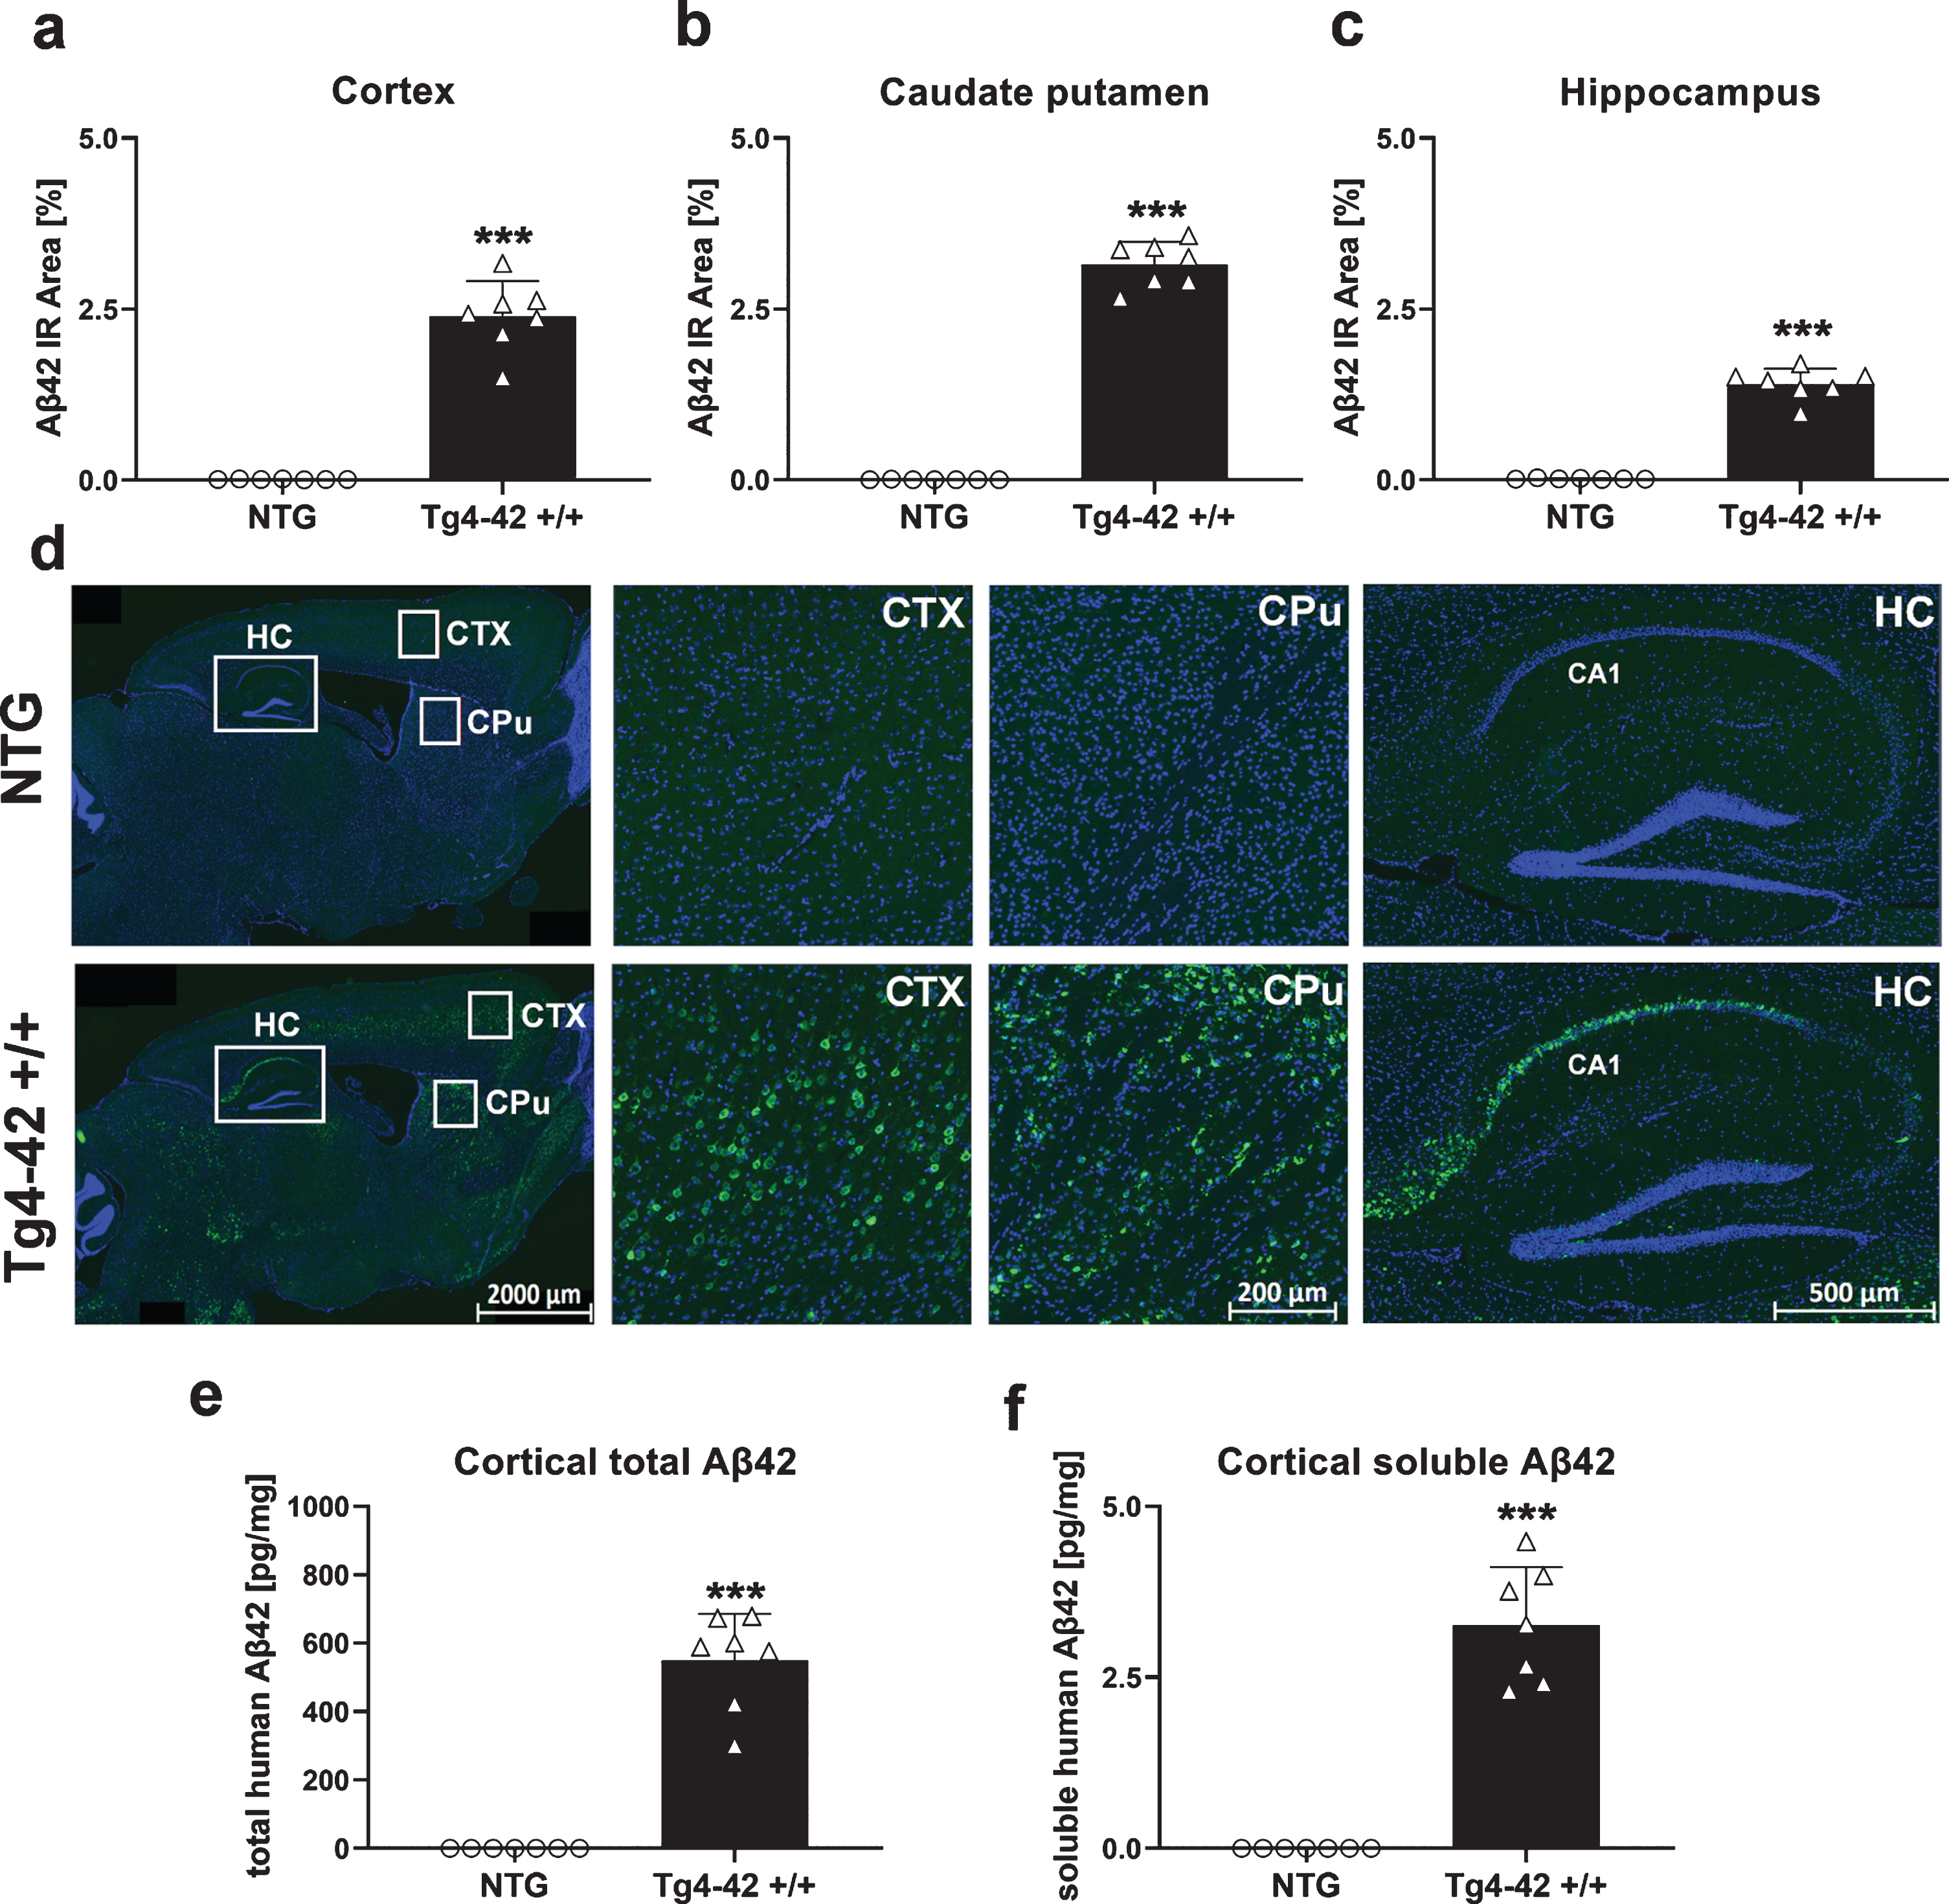 Quantification of Aβ42 expression in the central nervous system of Tg4-42 +/+ mice. Histological quantification of Aβ42 expression in cortex (a), caudate putamen (b), and hippocampus (c) in 9-month-old Tg4-42 +/+ mice. d) Representative images of Aβ42 (green) and DAPI (blue) labeling in 9-month-old Tg4-42 +/+ and non-transgenic mice. e) Biochemical quantification of cortical total human Aβ42 levels in pg/mg and (f) soluble human Aβ42 levels in pg/mg. (a-f) n = 7 per group. Mean + SEM. Unpaired t-test. ***p < 0.001.